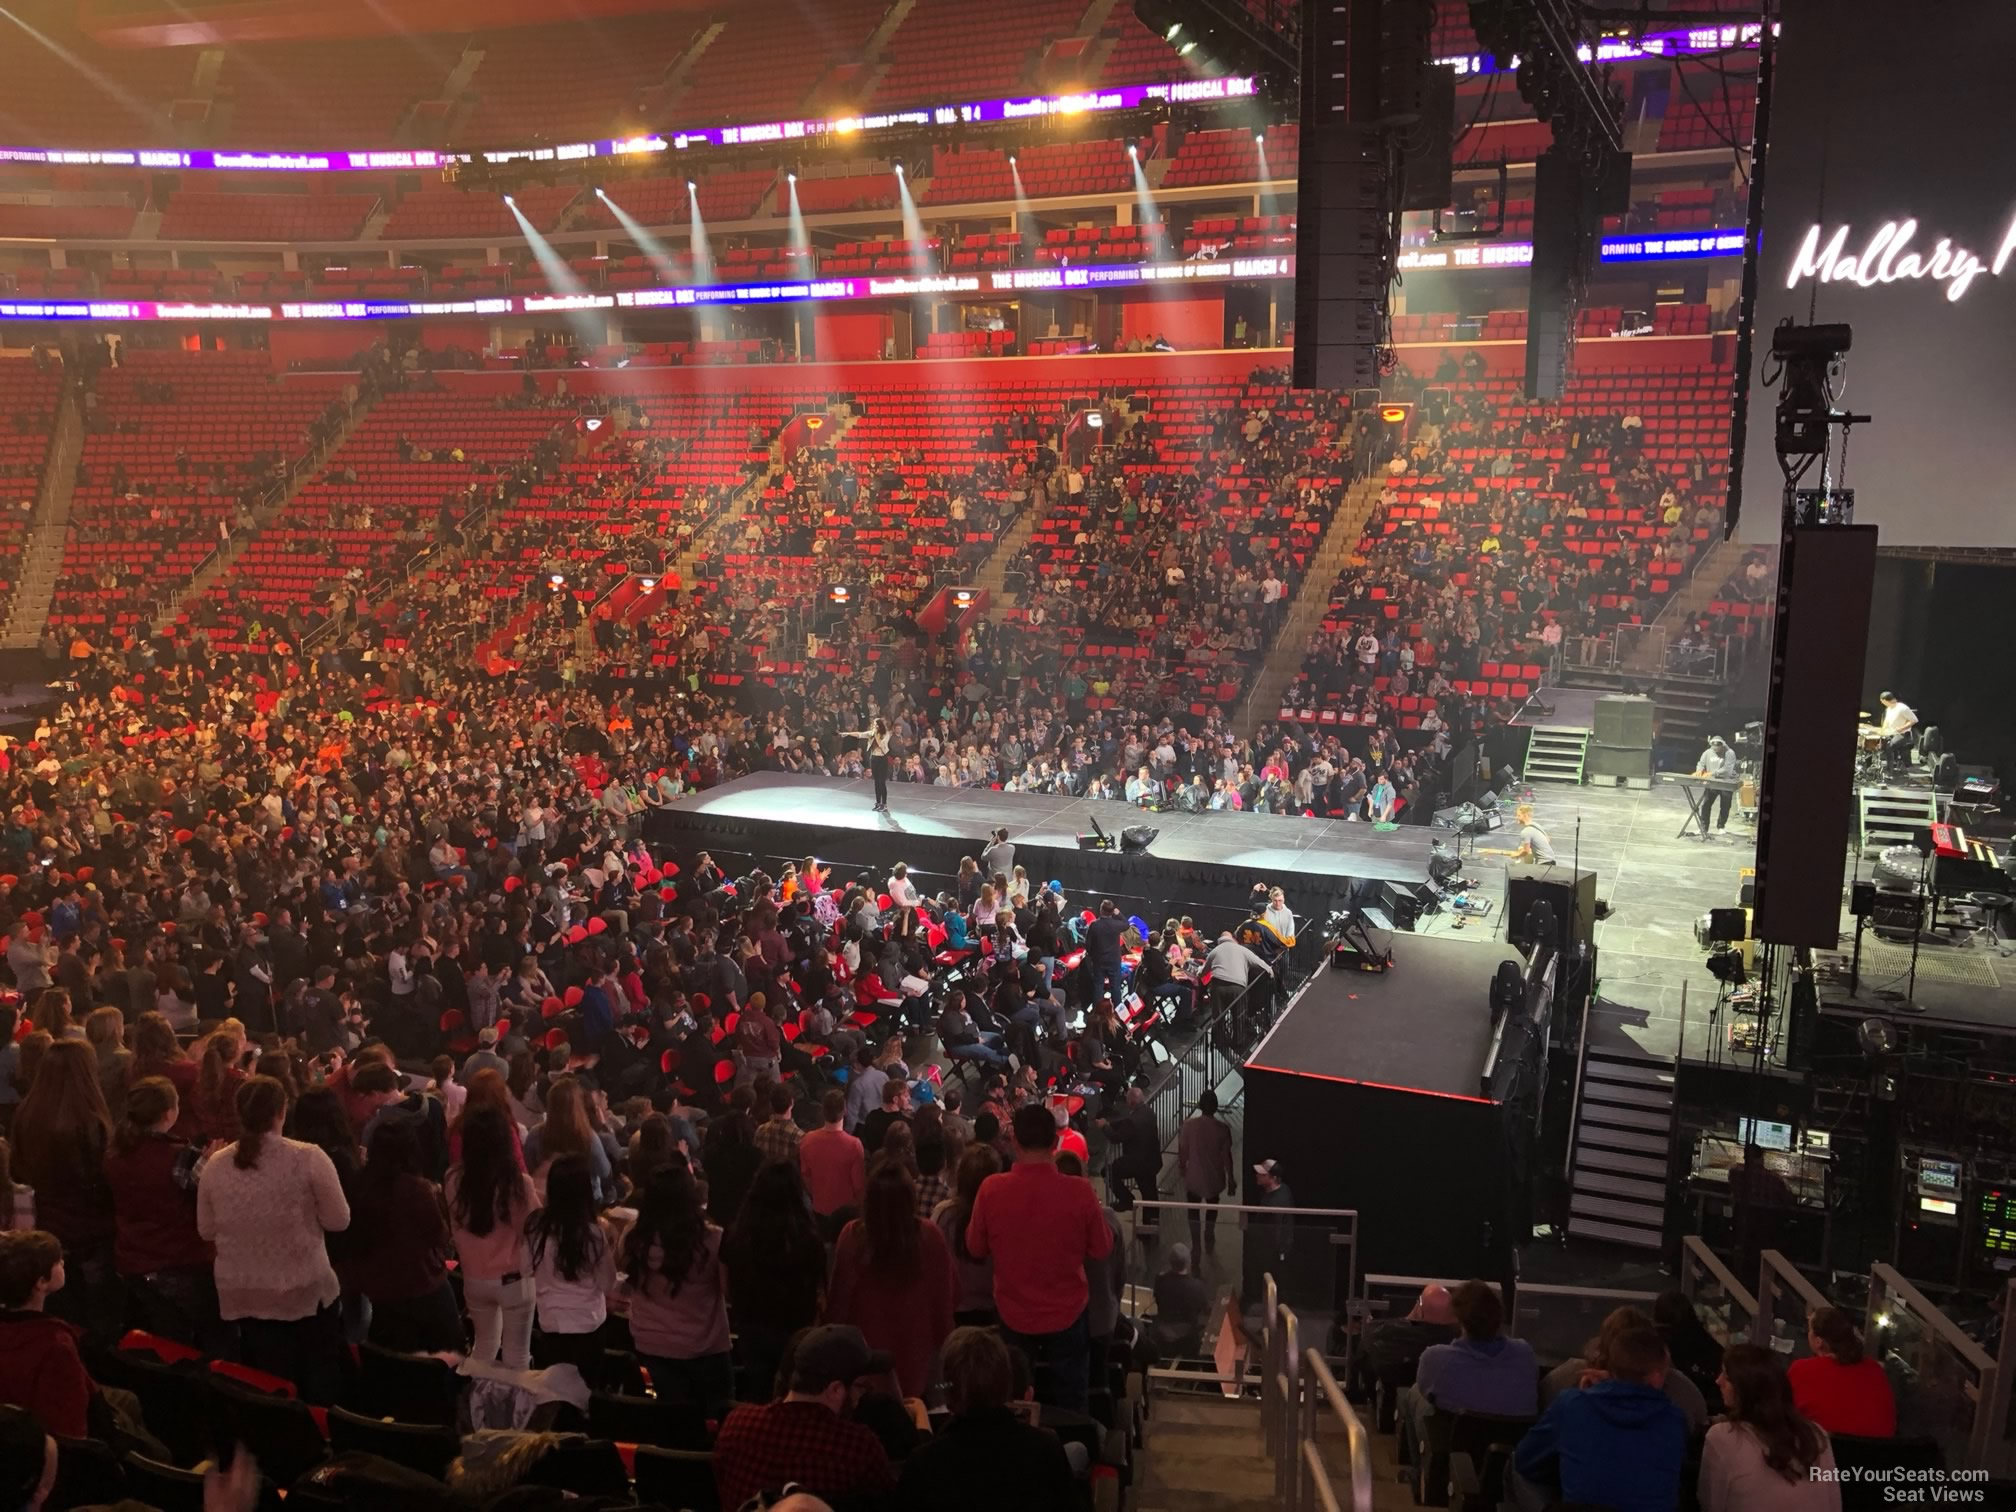 section 106, row 18 seat view  for concert - little caesars arena